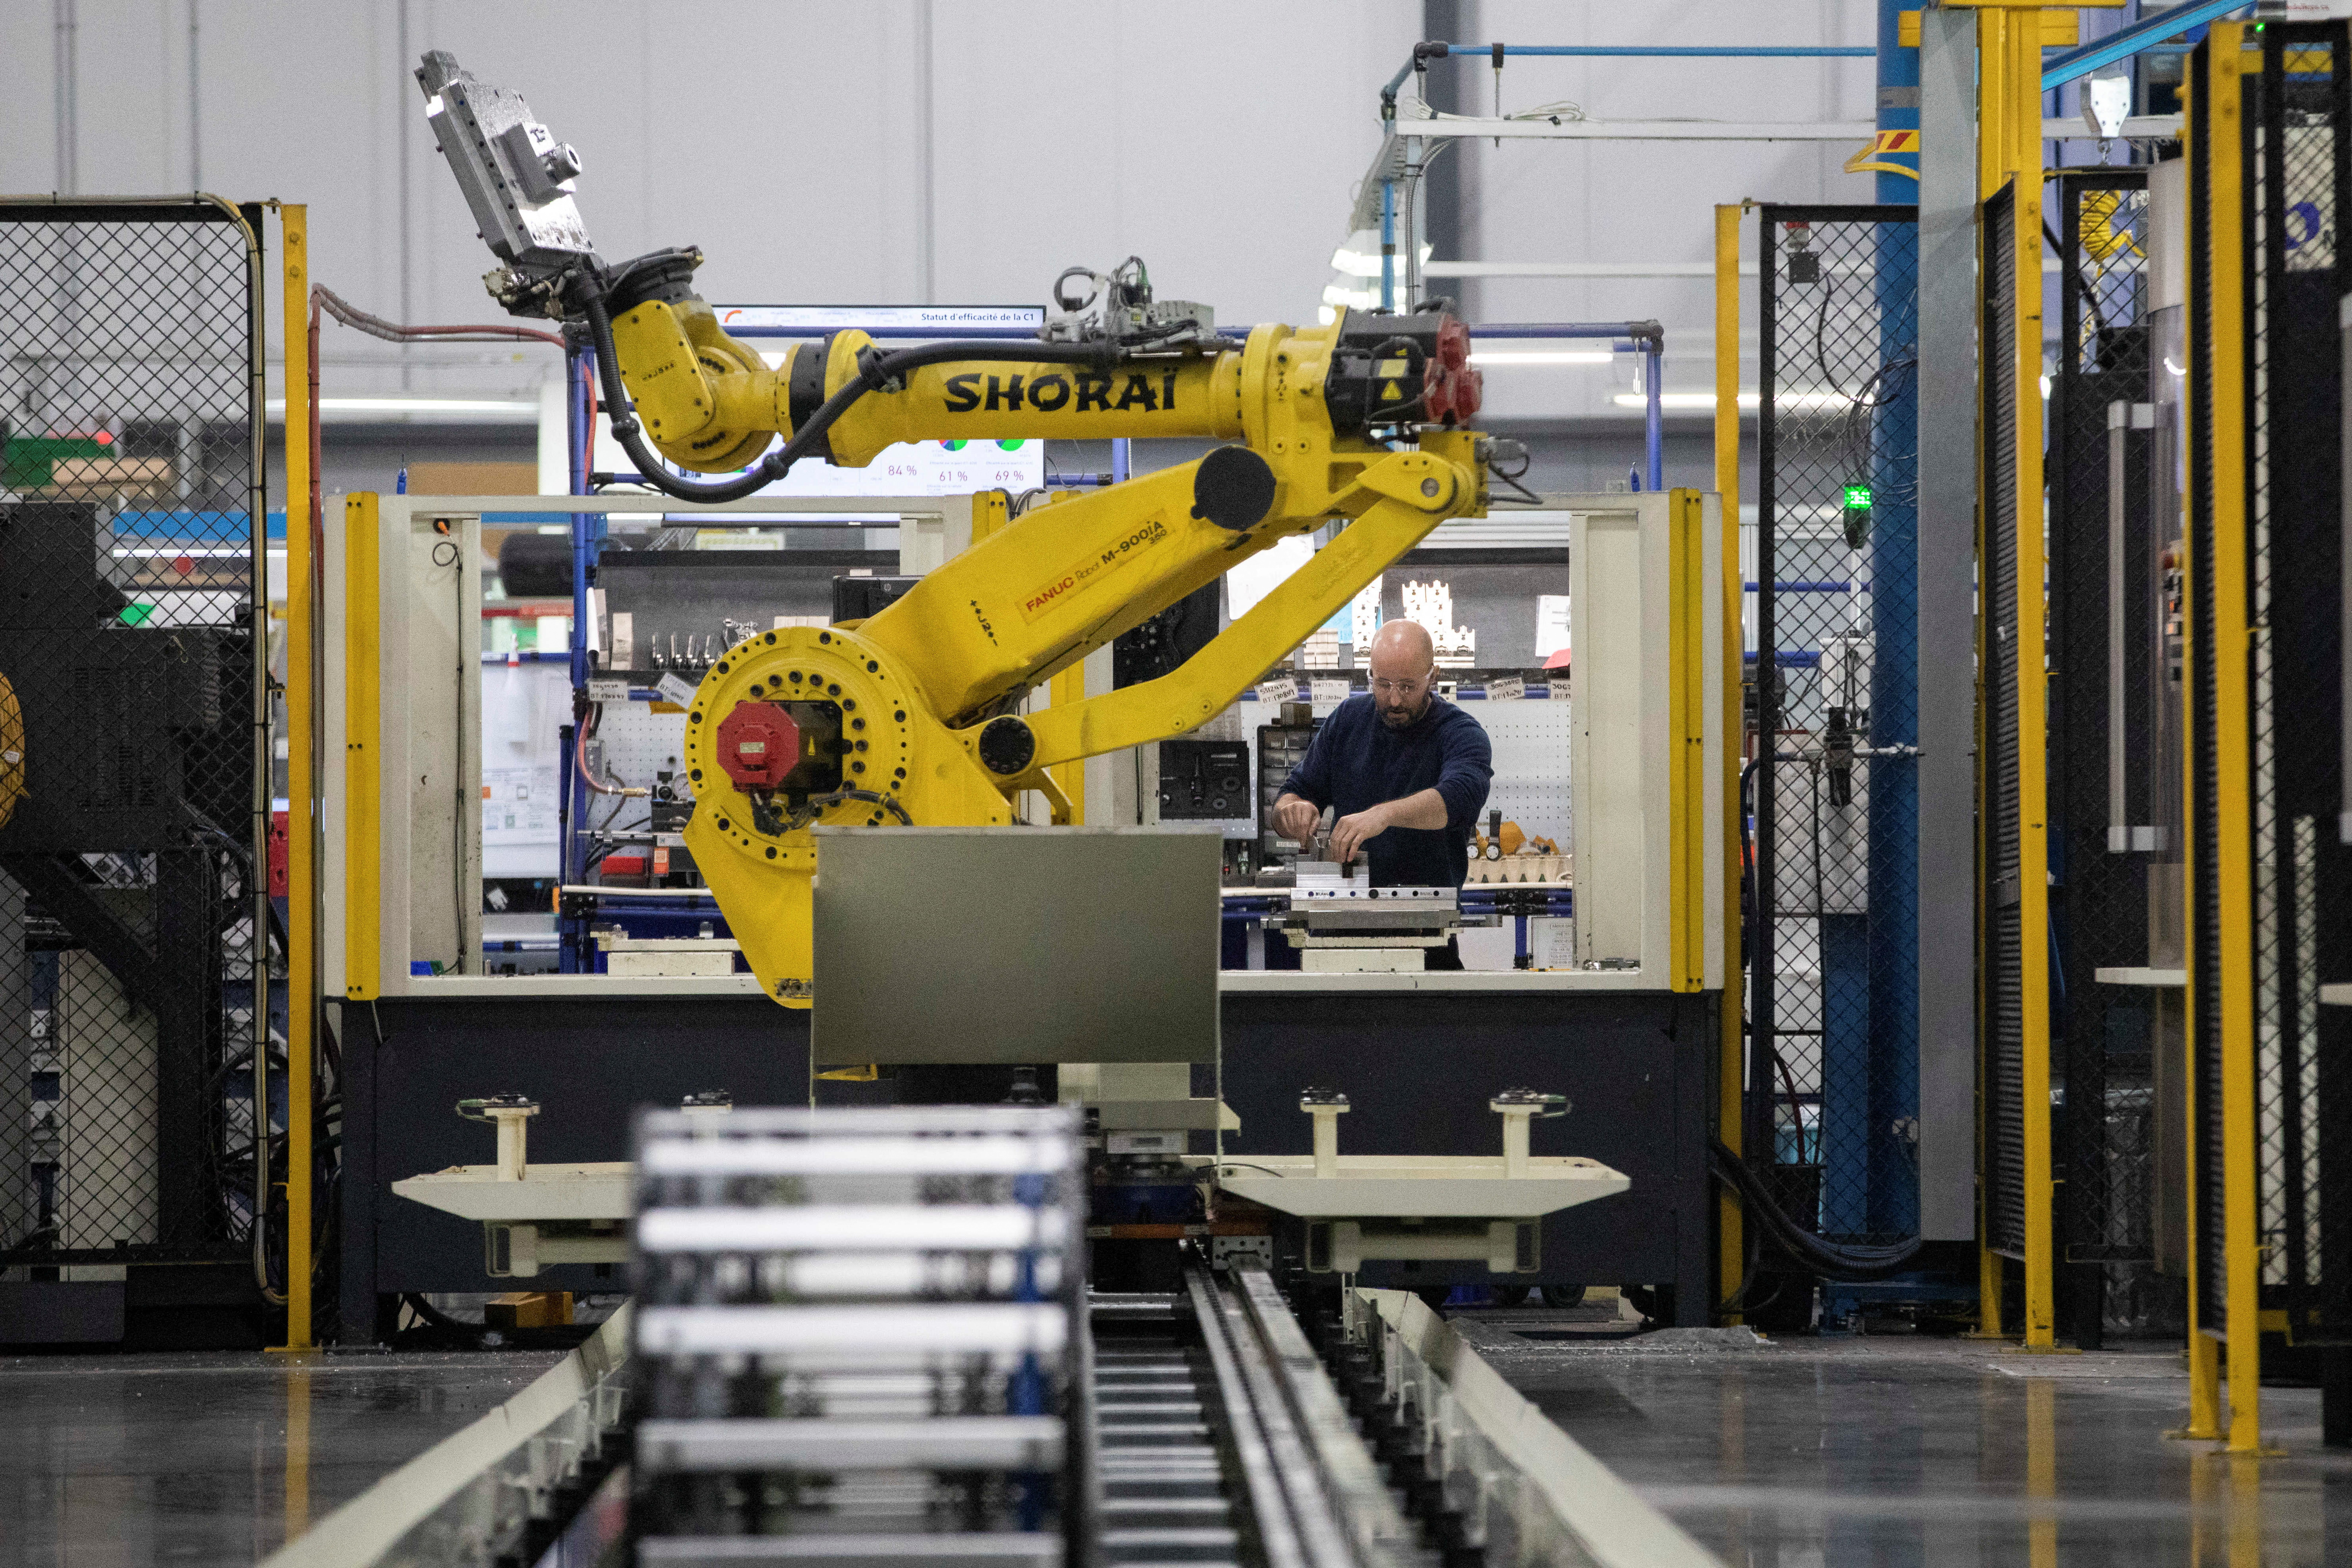 A factory worker works on an aircraft part, as the robot arm of an automated five-axis cell operates autonomously nearby, at Abipa Canada, in Boisbriand